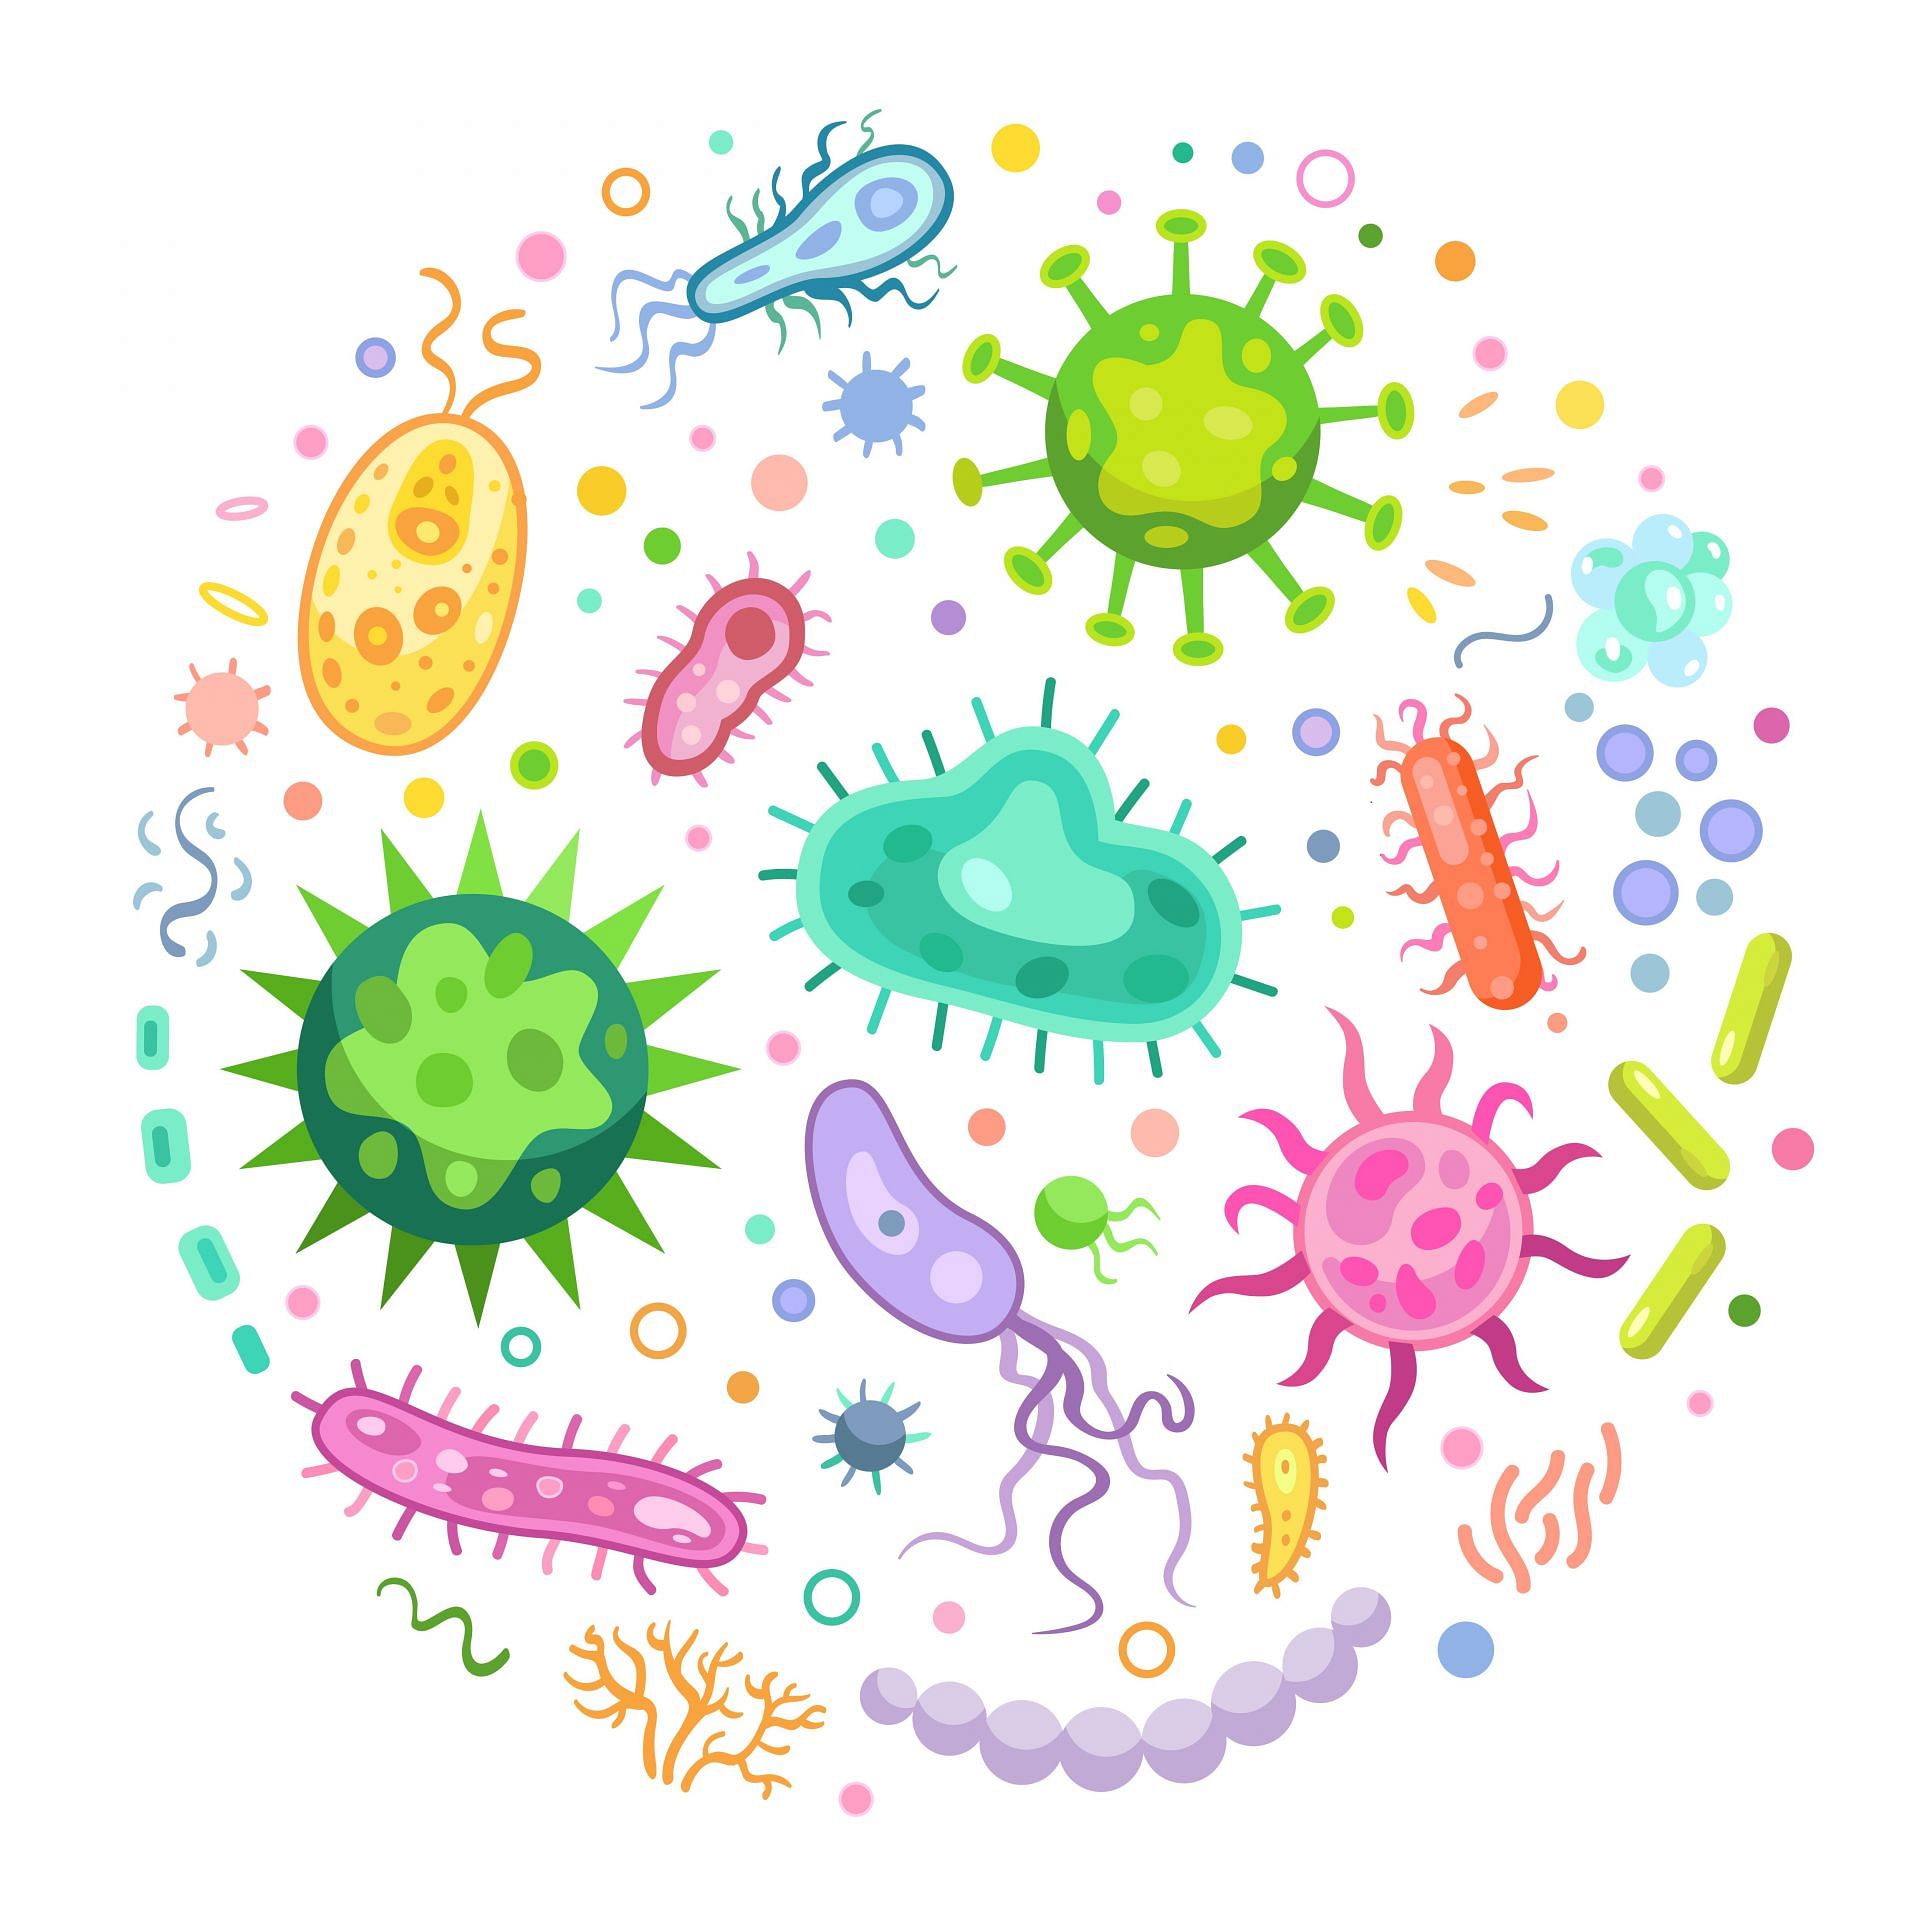 We have been taught to see bacteria only in a negative light. (Image via Freepik/vector)